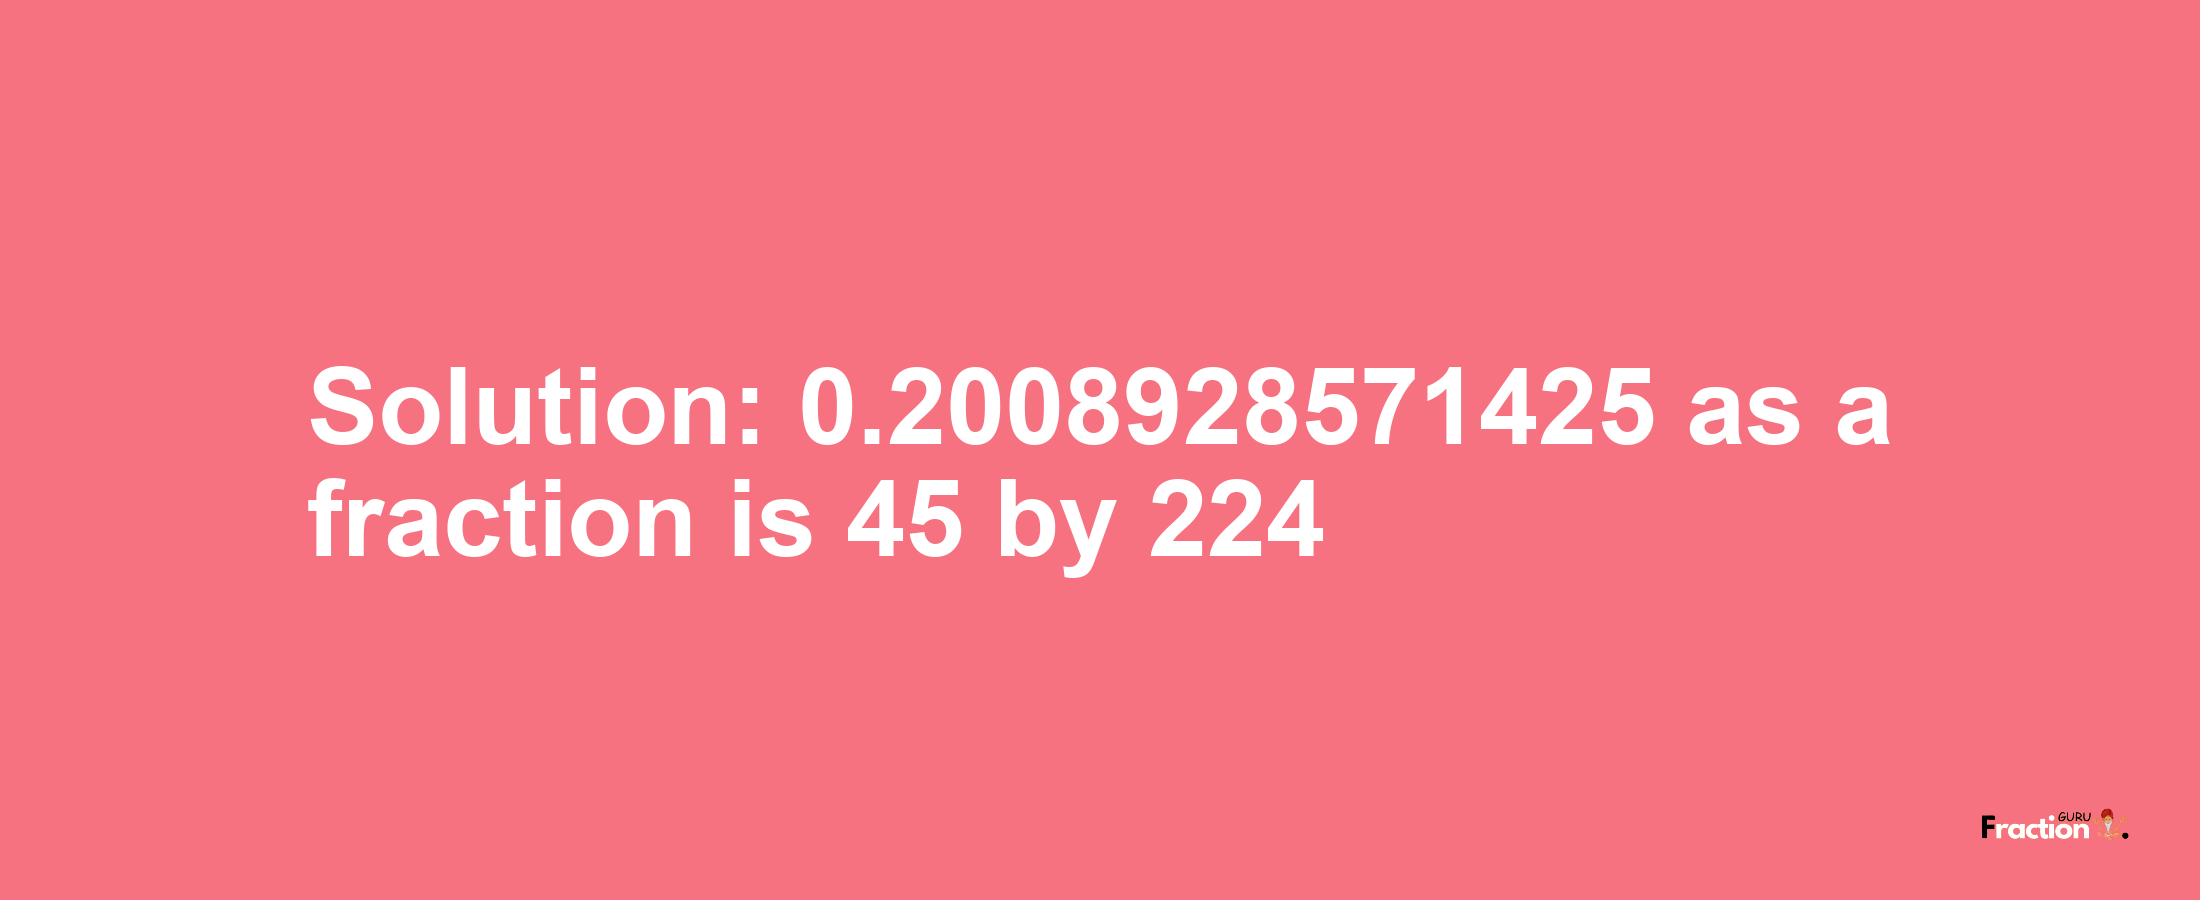 Solution:0.2008928571425 as a fraction is 45/224